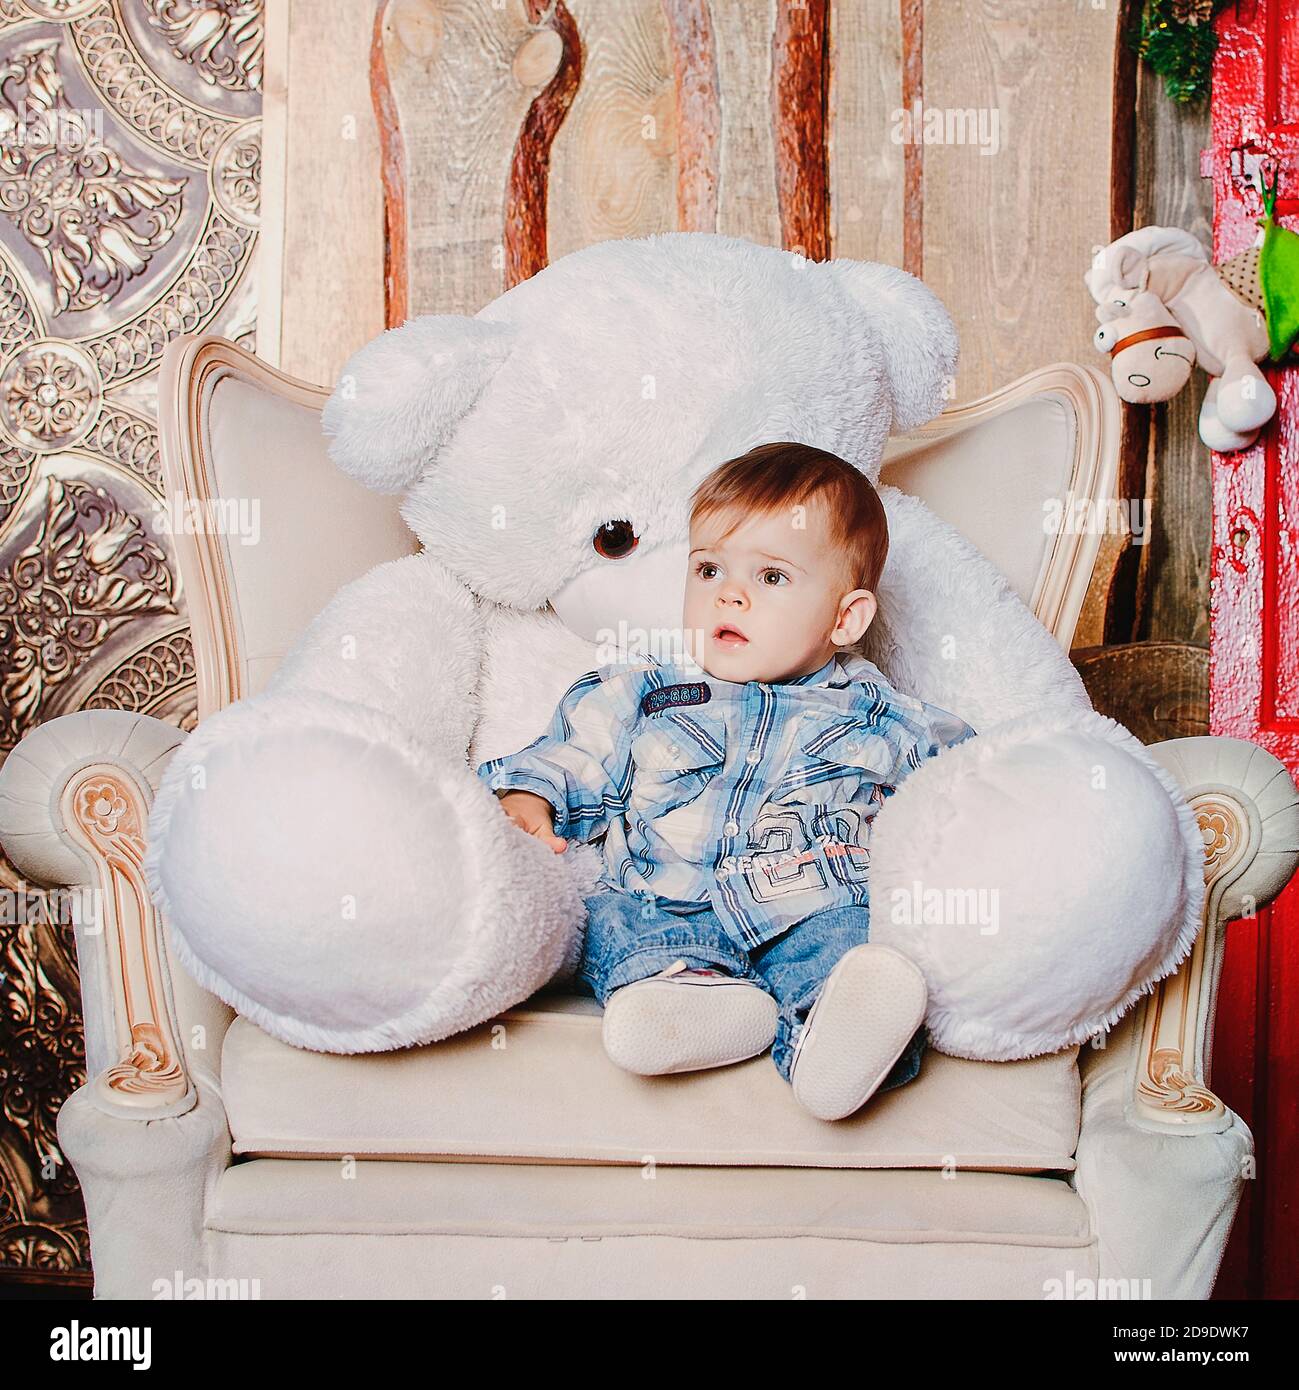 Cheerful and happy little boy sitting with his bear toy on the chair against Christmas decorations. Christmas traditions. Stock Photo